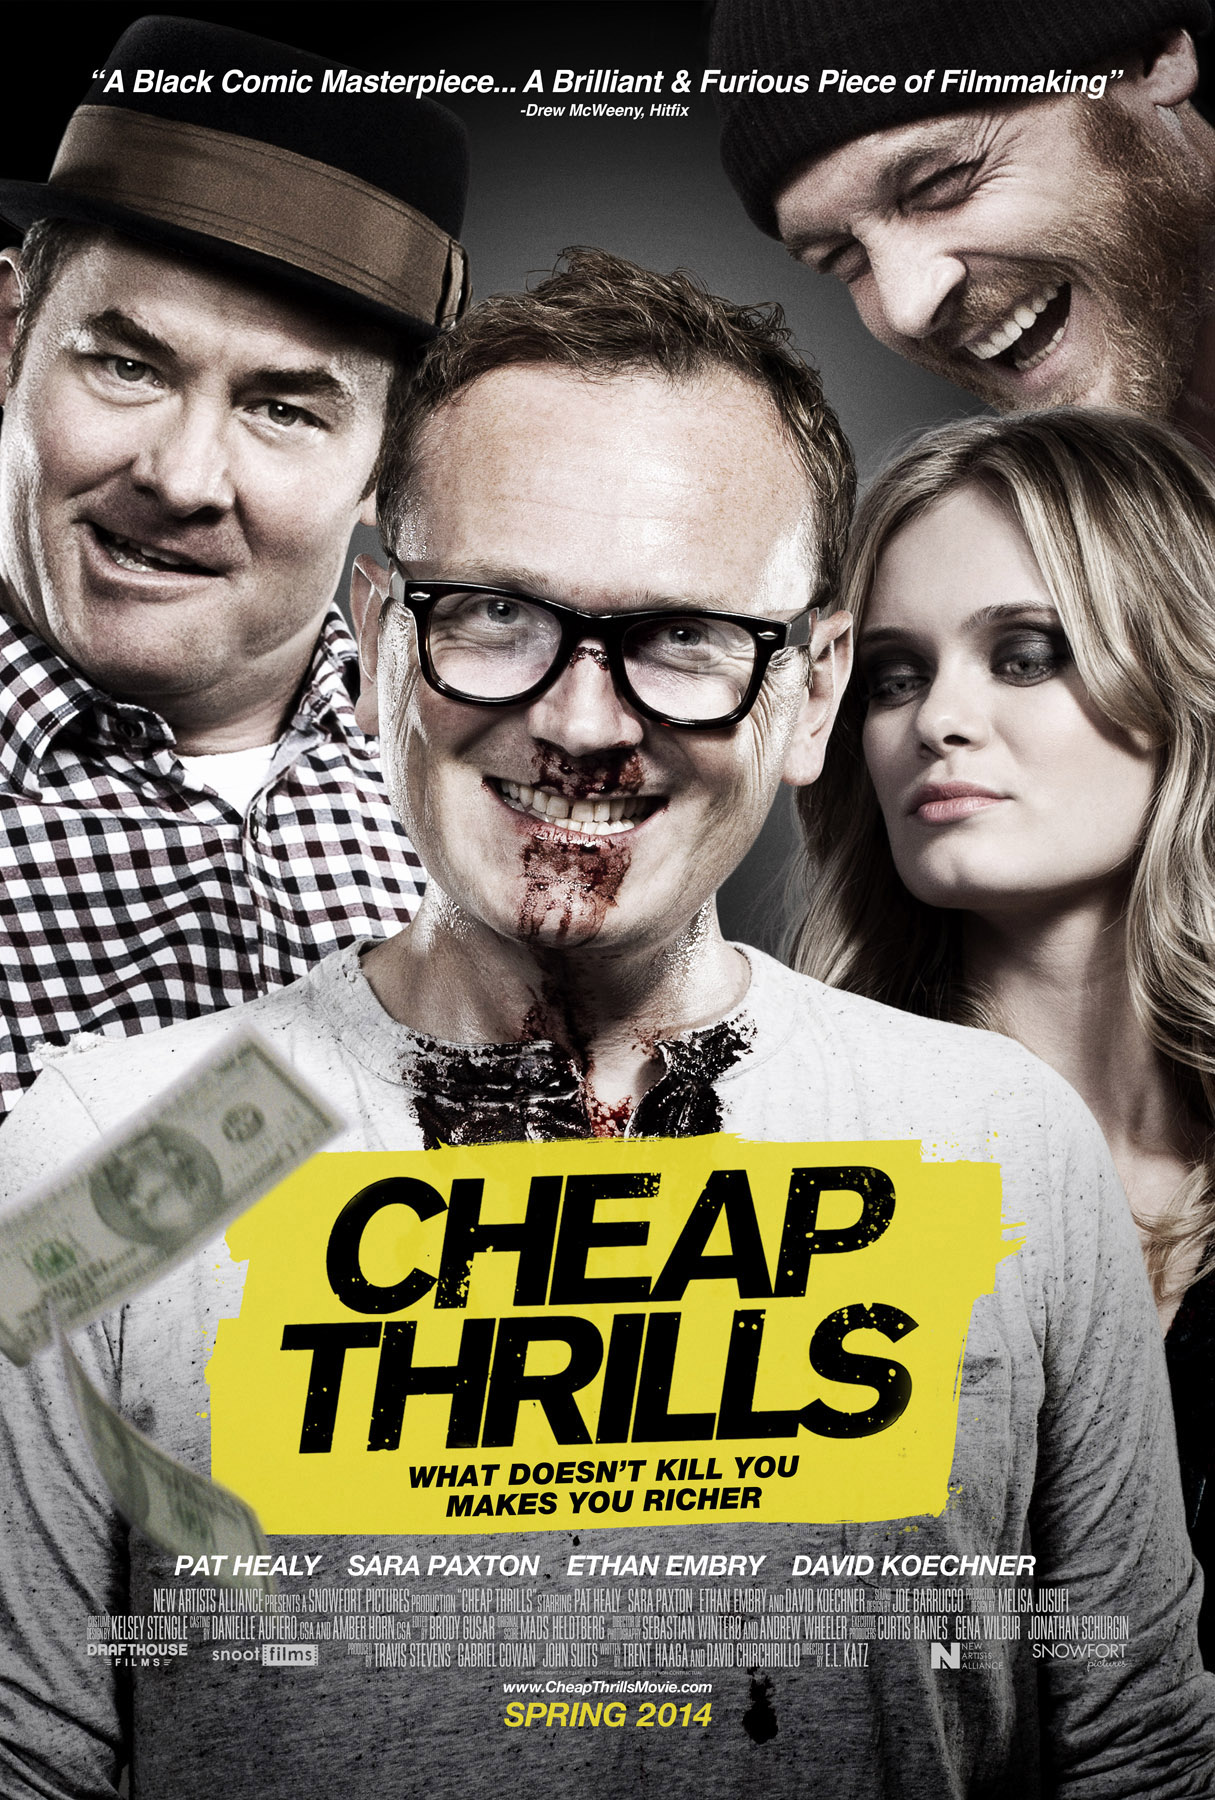 Cheap Thrills Exclusive Images, See It On VOD This Month!